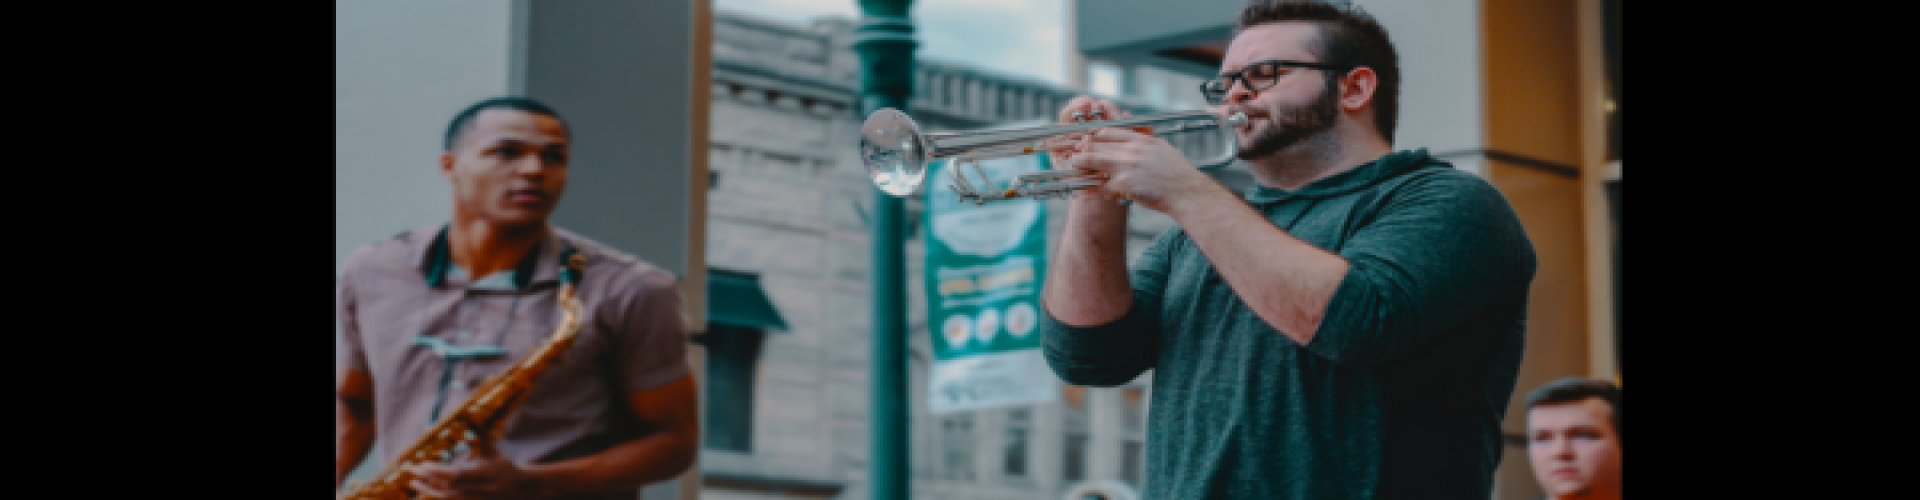 Man playing trumpet with a band.